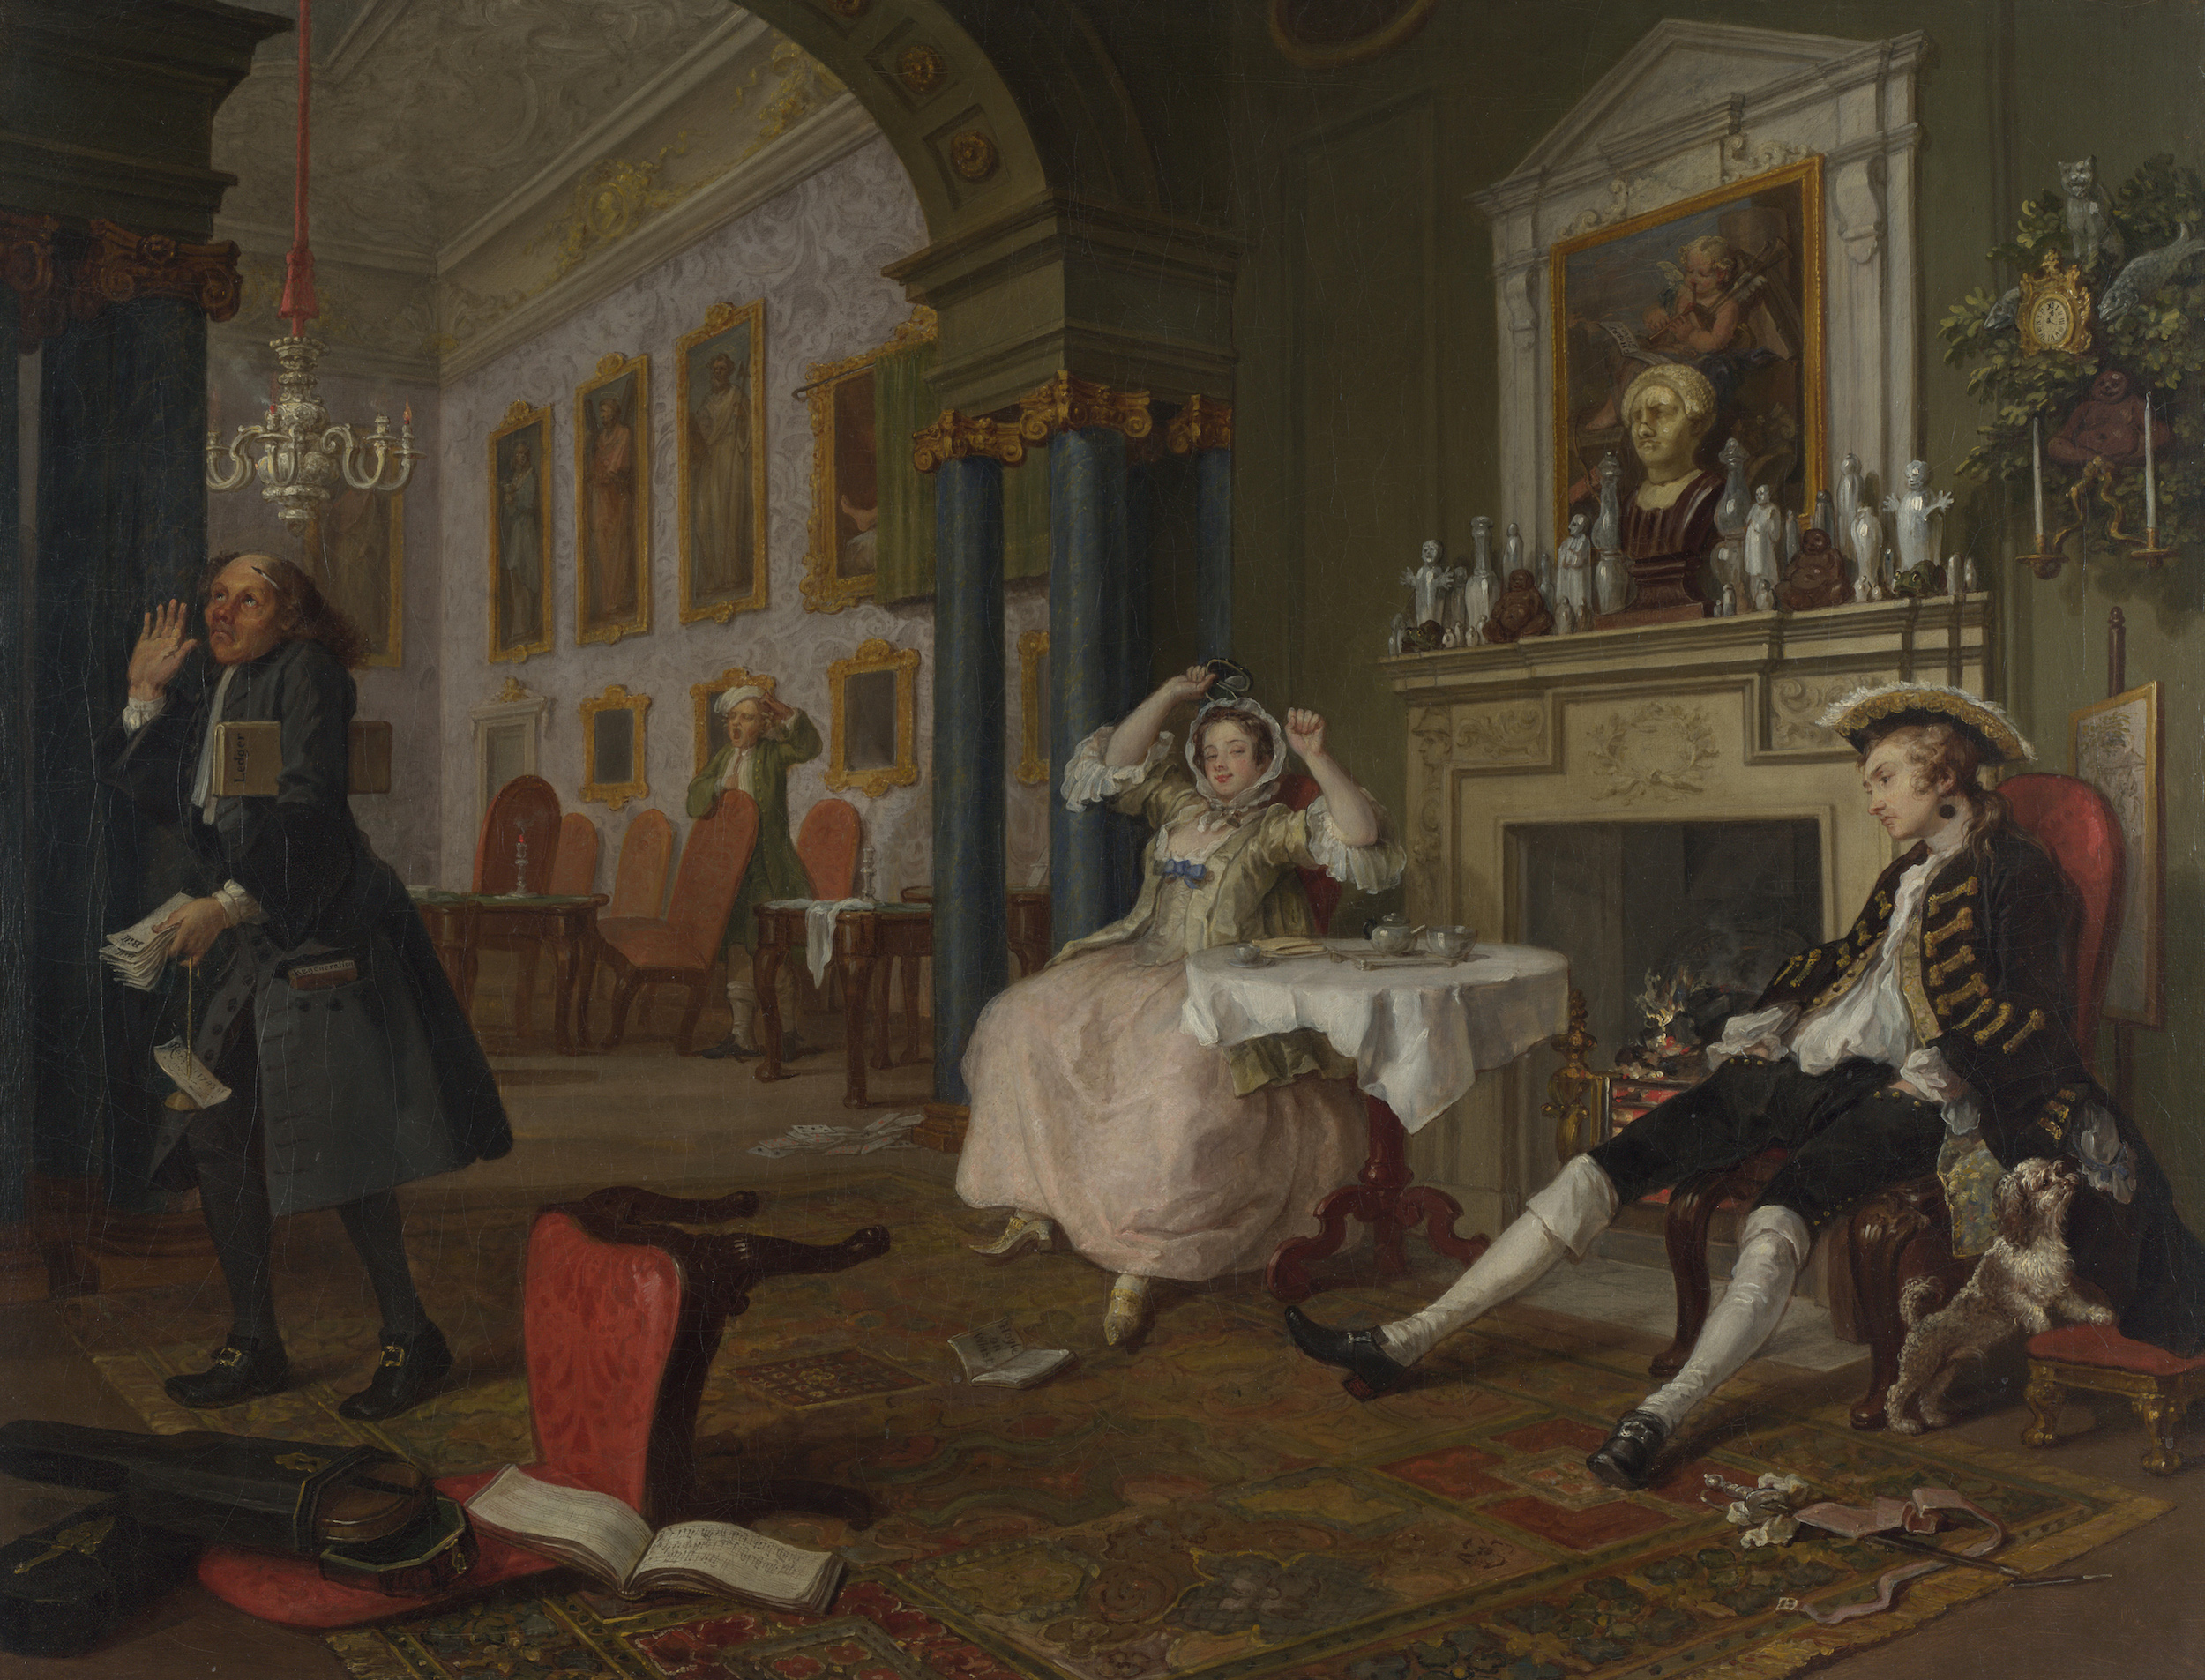 Marriage a-la-mode: 2. The Tete à Tete by William Hogarth - 1743 - 69.9 x 90.8 cm National Gallery